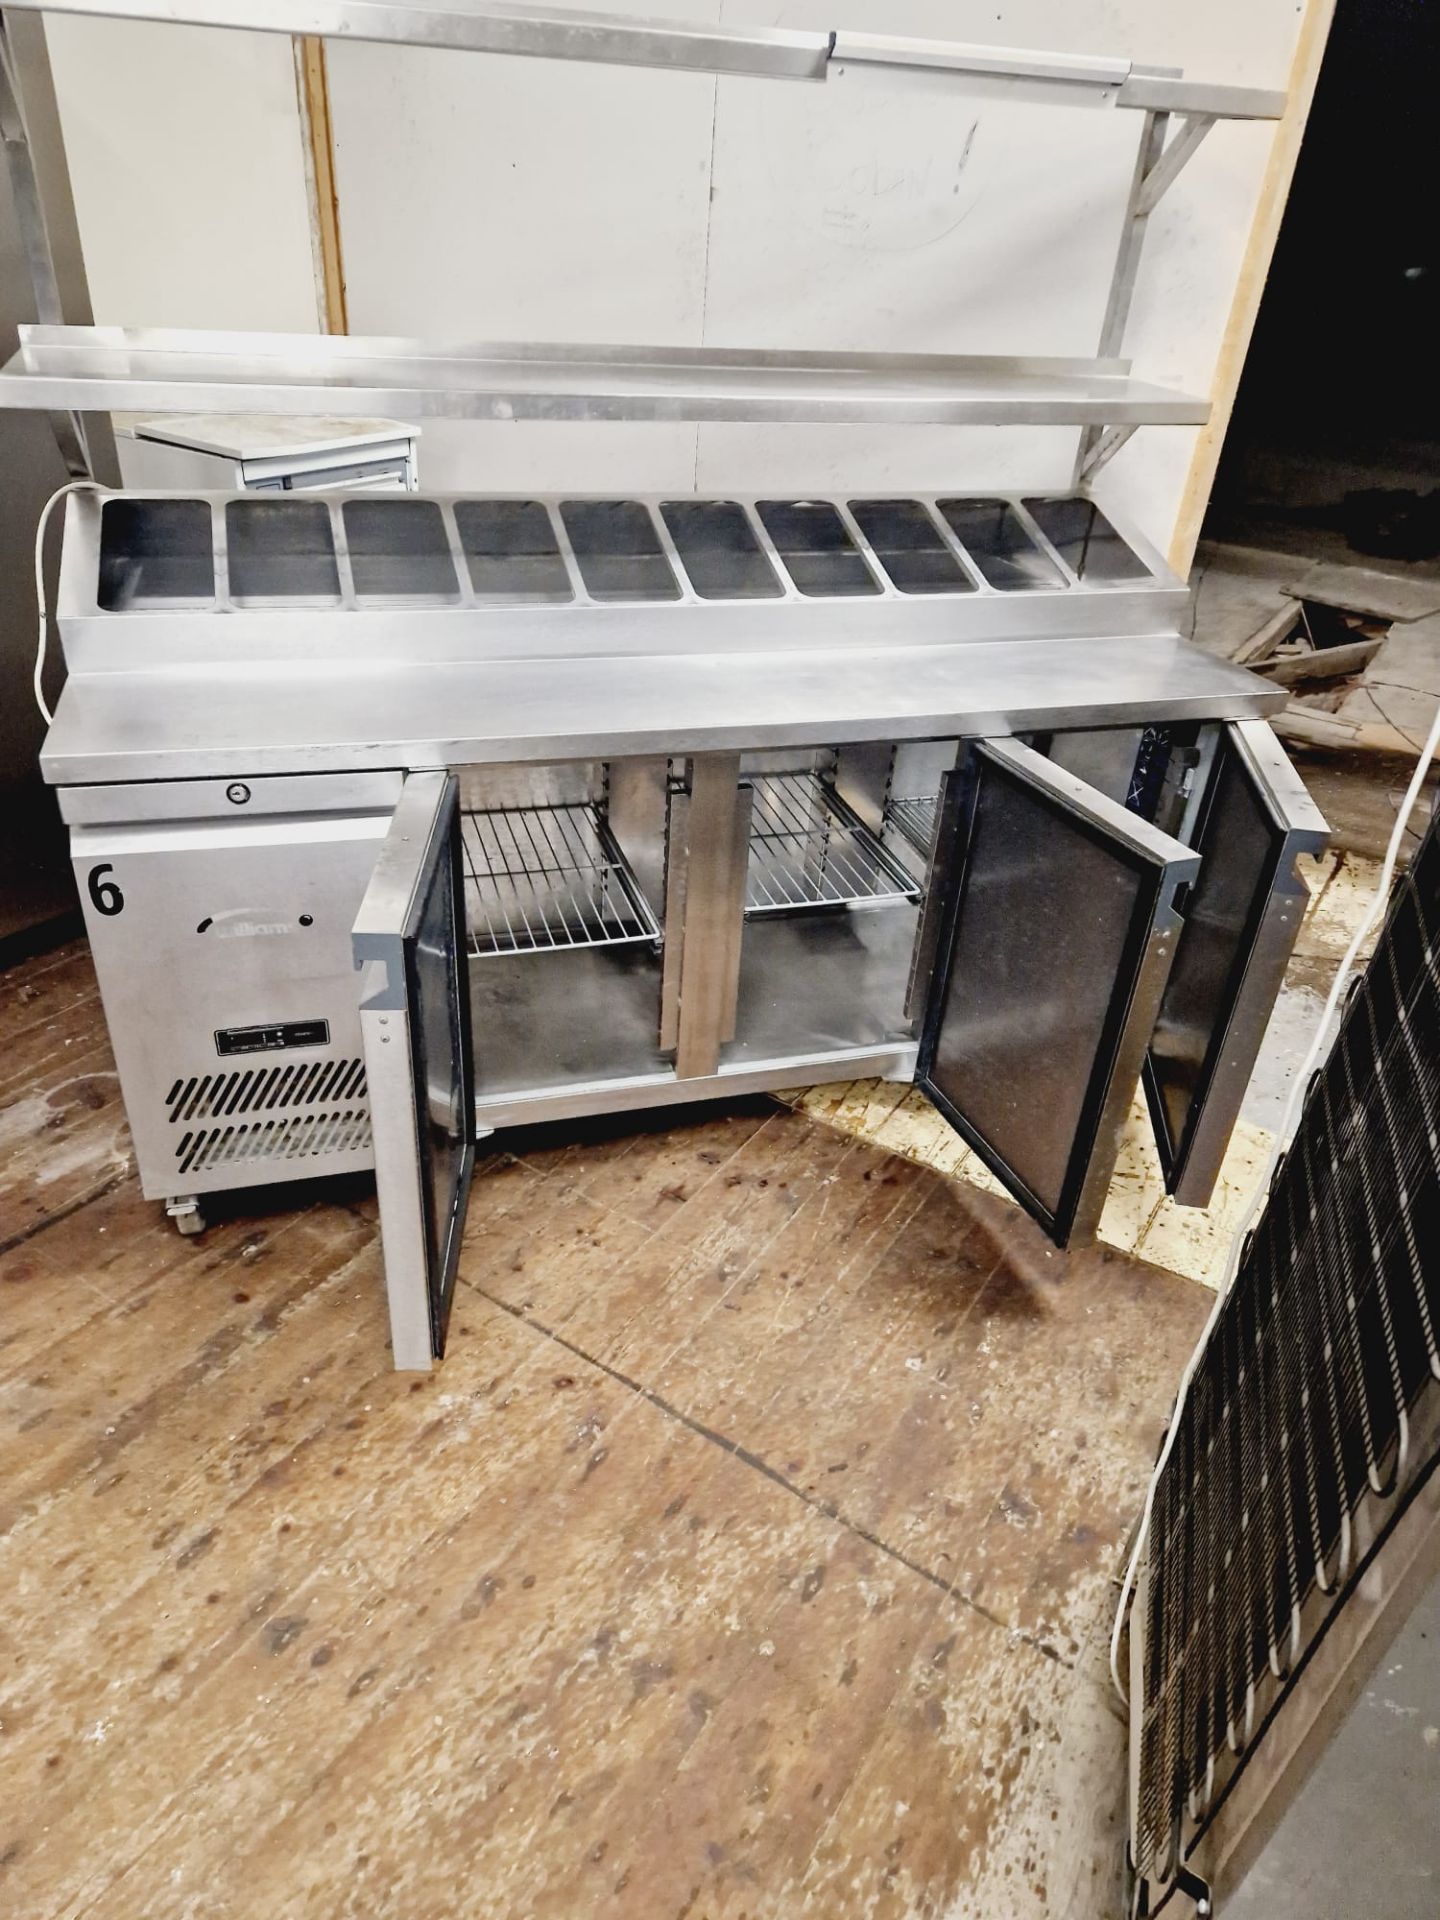 WILLIAMS 3 DOOR PIZZA PERP FRIDGE WITH SHELF -  SALAD BAR - FULLY WORKING AND SERVICED - Image 2 of 6